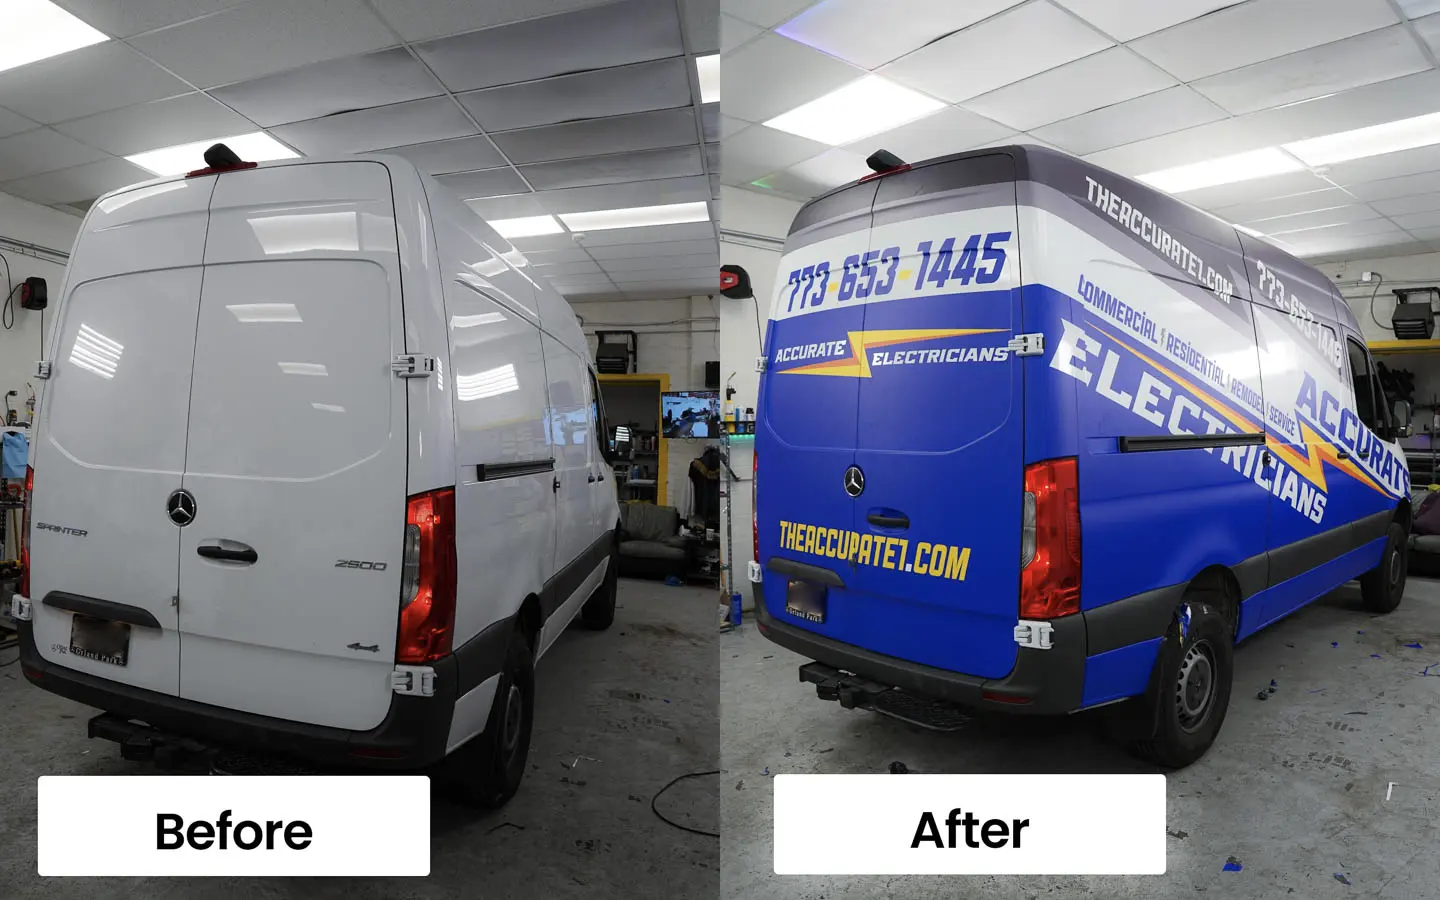 Install Van Graphics: Promote Your Brand Creatively and Affordably